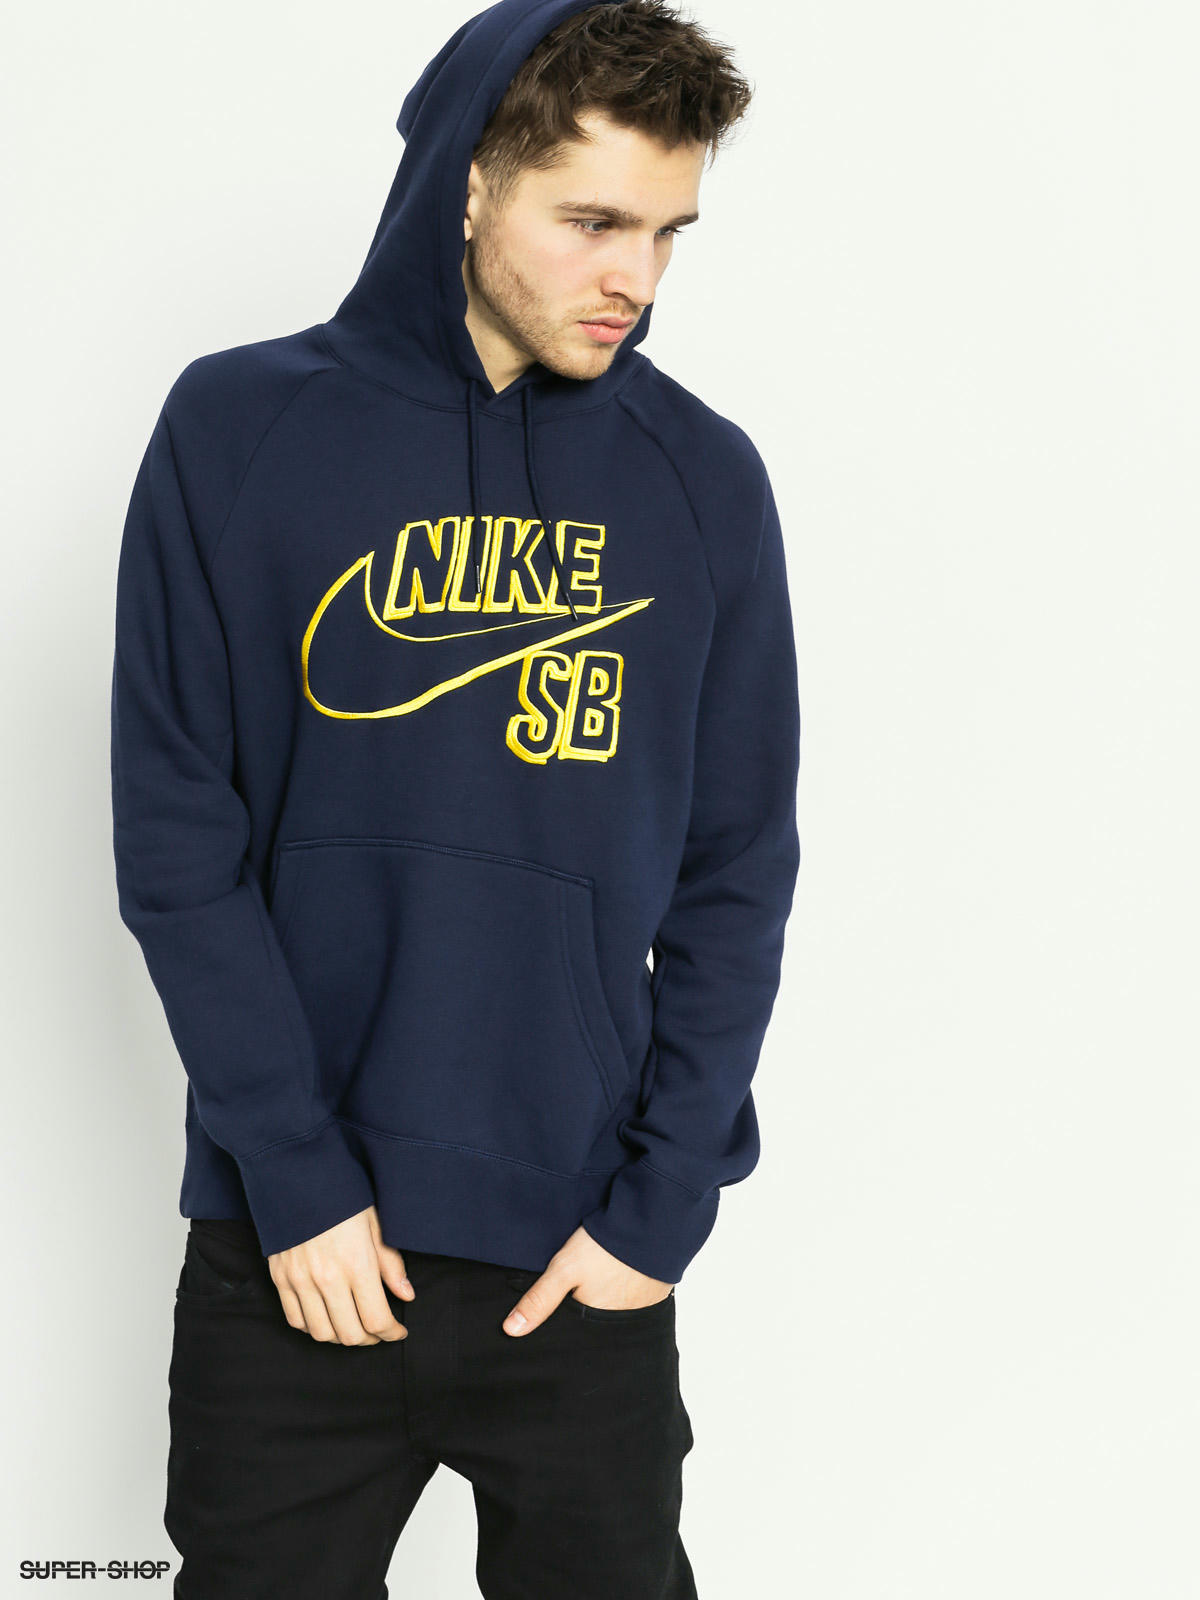 navy blue and yellow nike hoodie